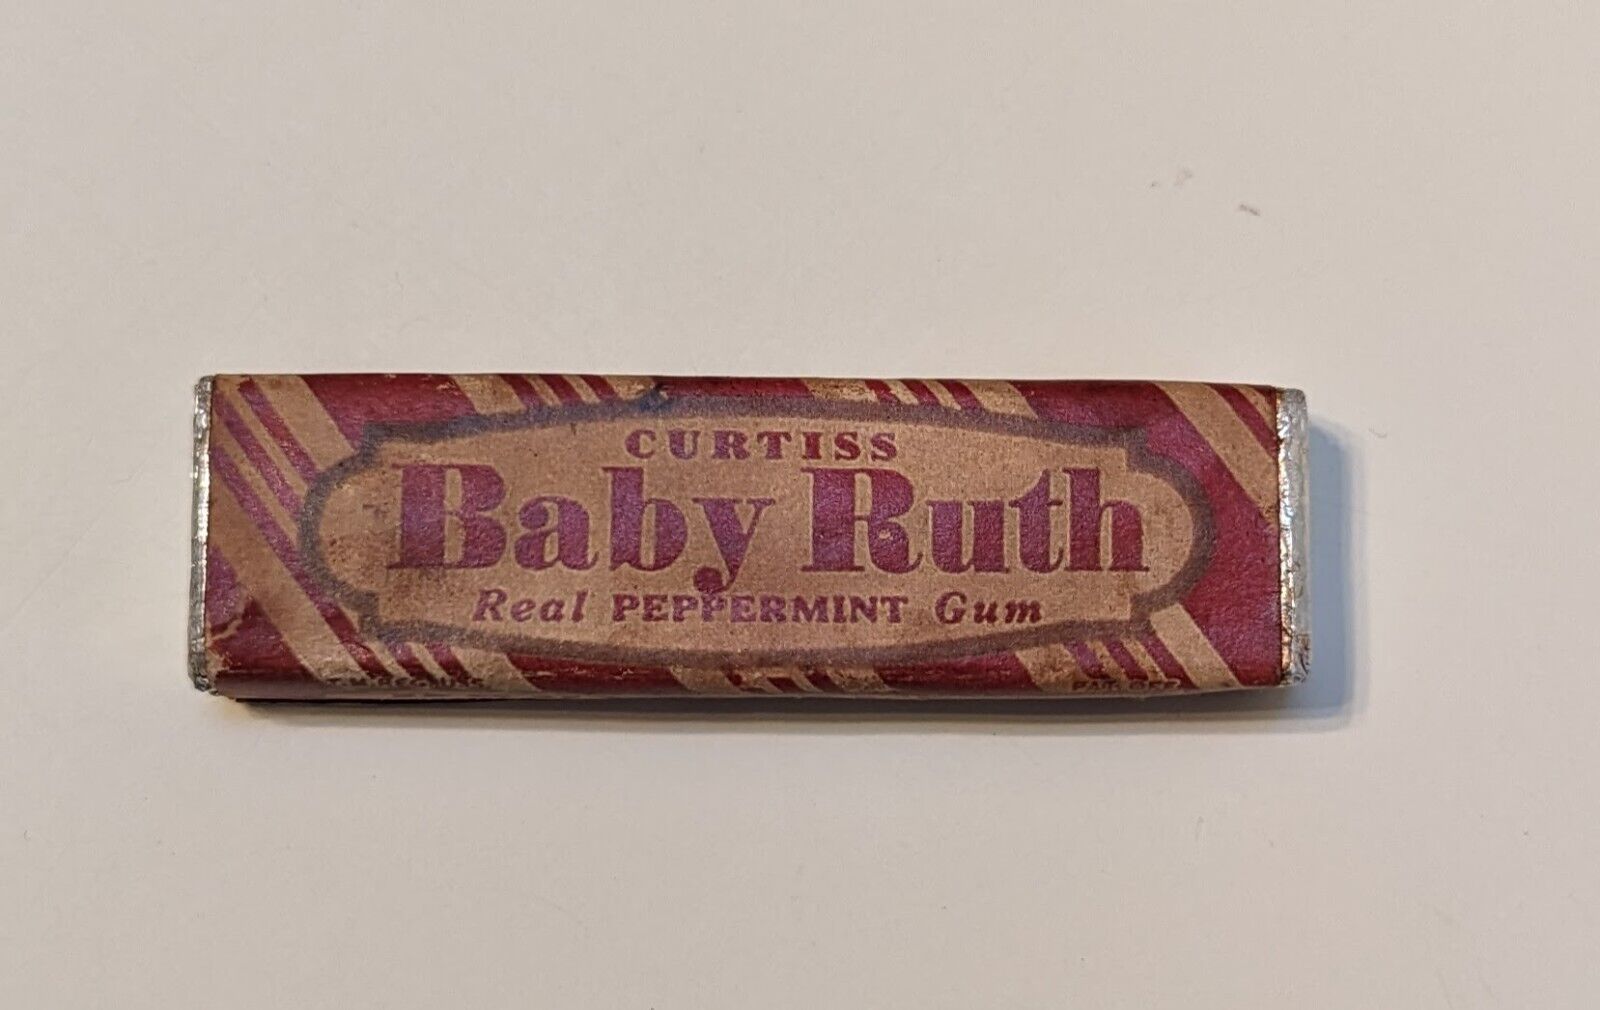 Vintage 1920\'s Curtiss Baby Ruth Chewing Gum